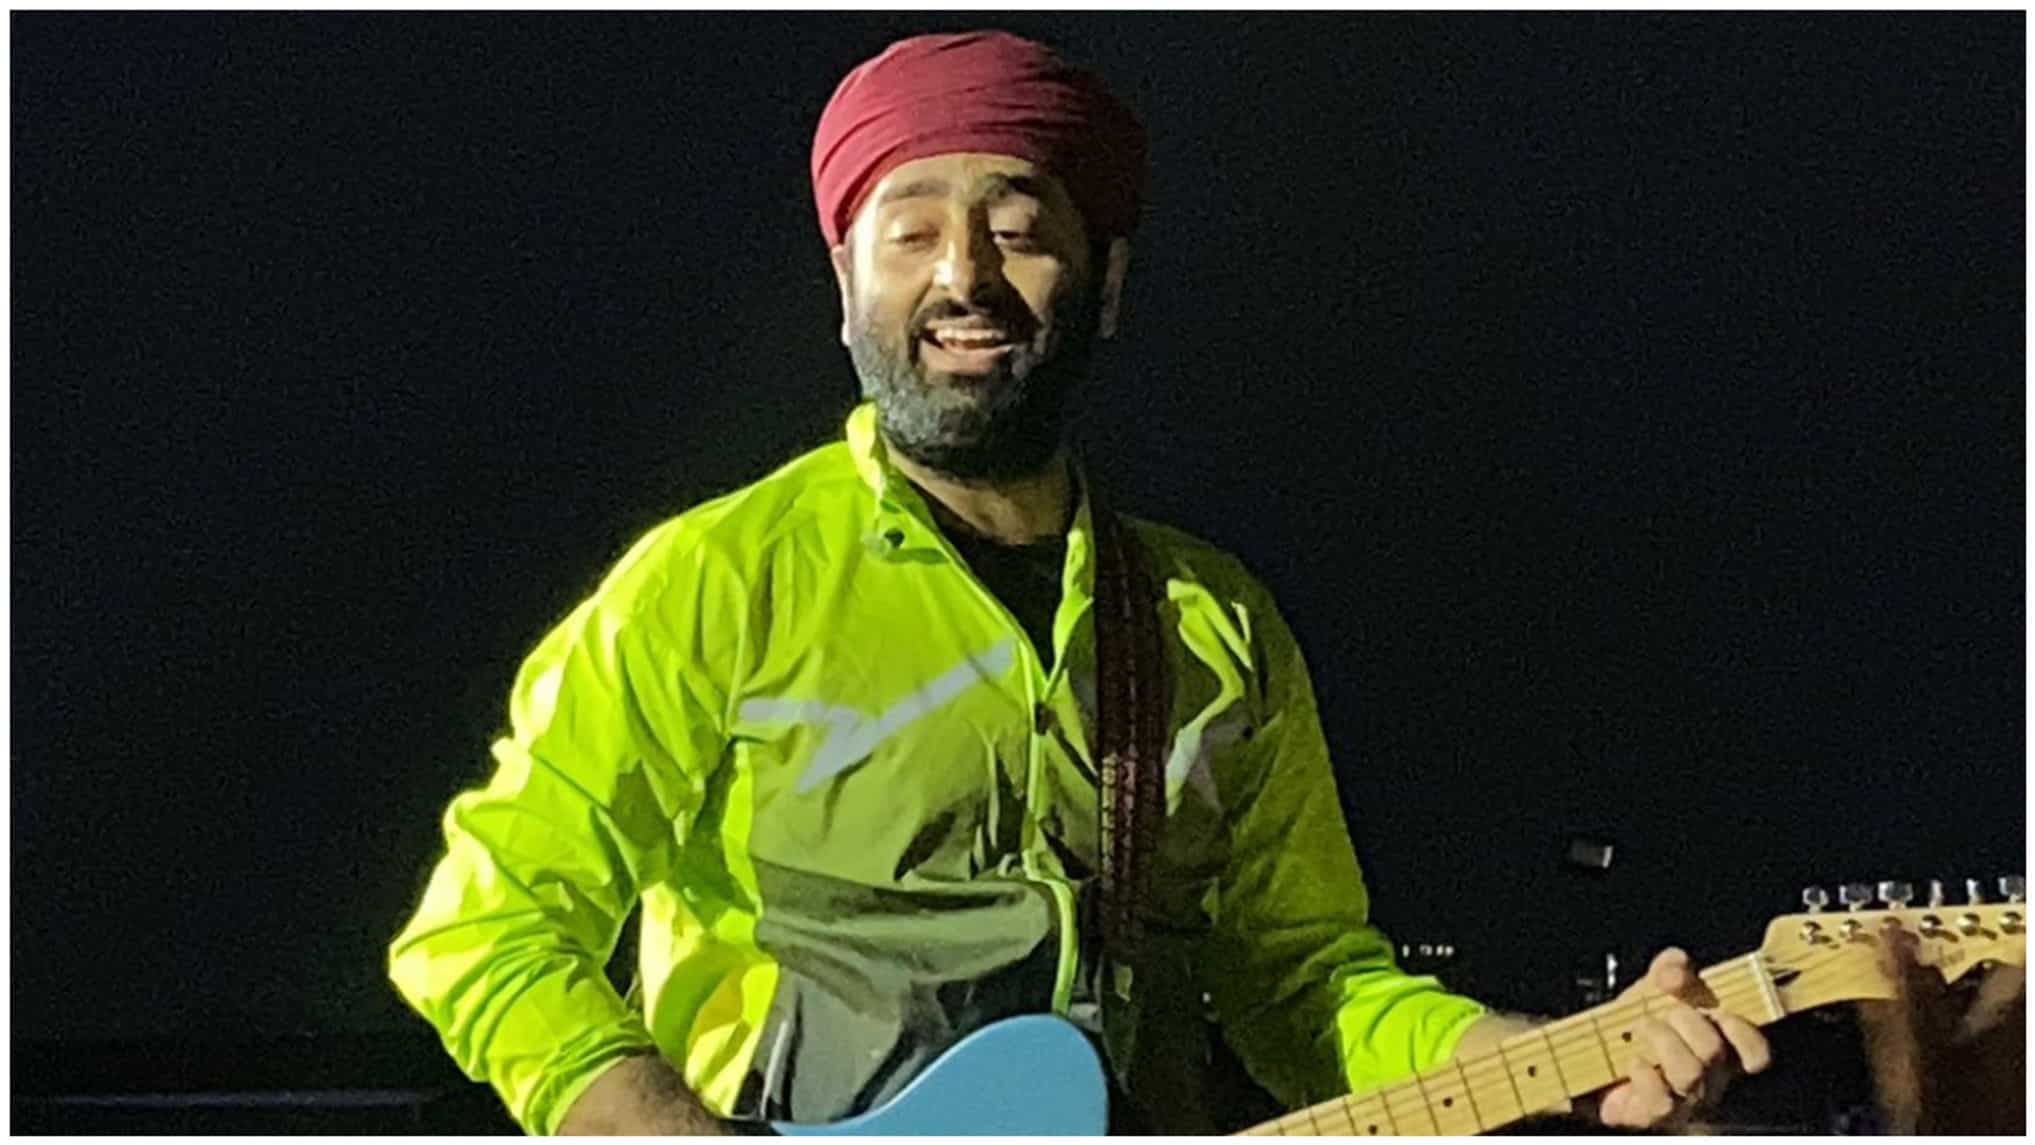 https://www.mobilemasala.com/music/Arijit-Singh-sings-Zingaat-for-the-first-time-at-his-Pune-concert---Watch-how-the-massive-crowd-reacted-i224743